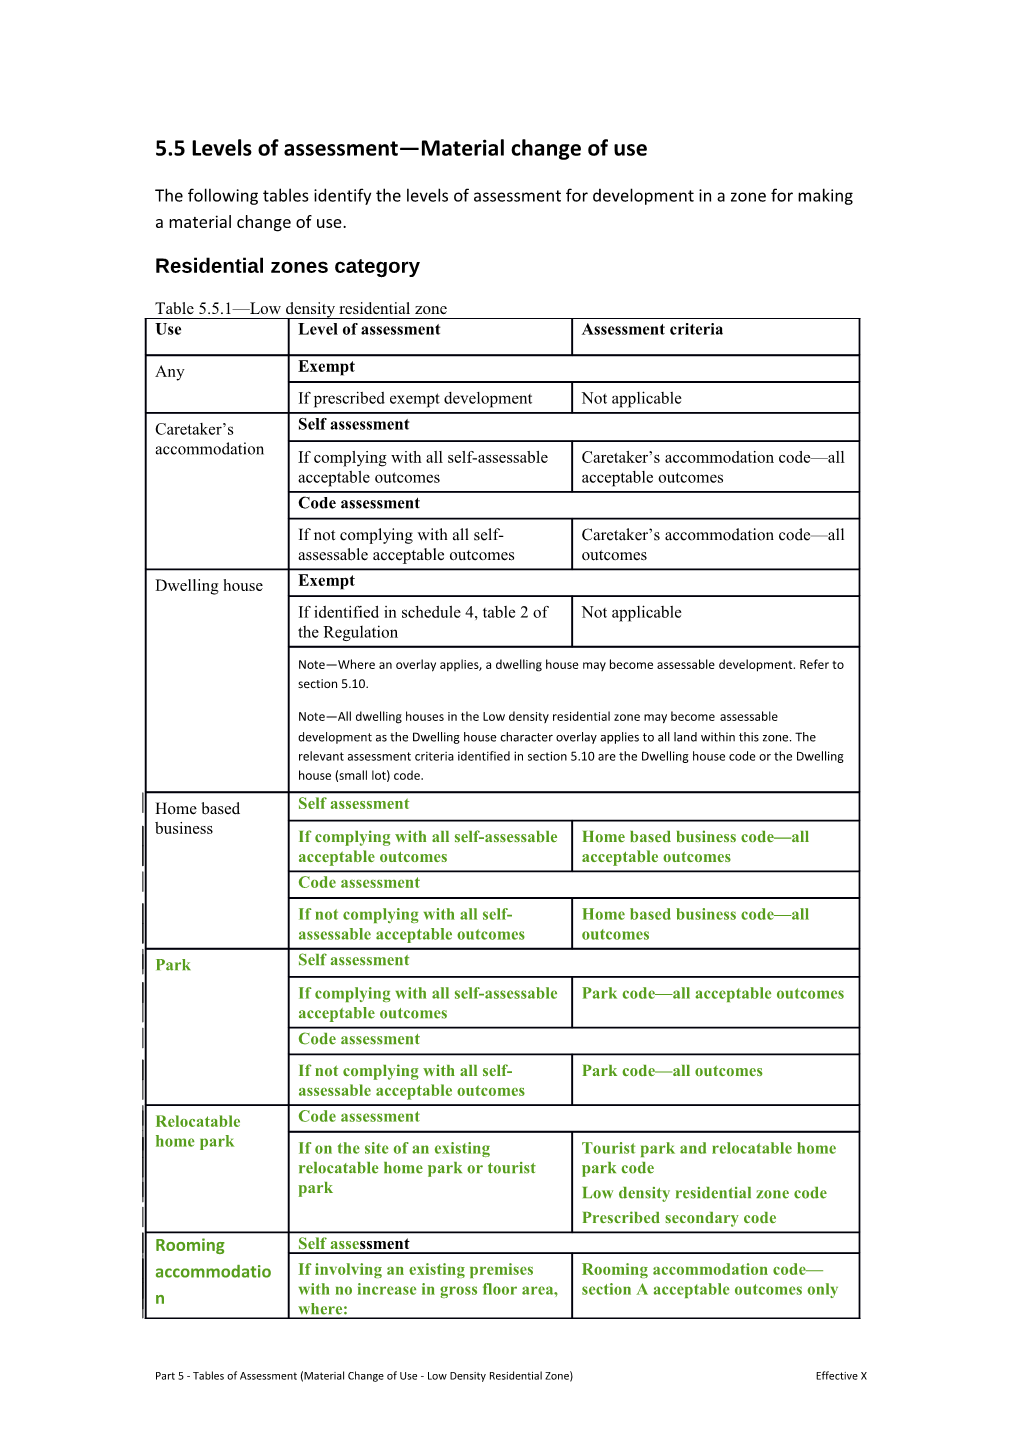 5.5 Levels of Assessment Material Change of Use